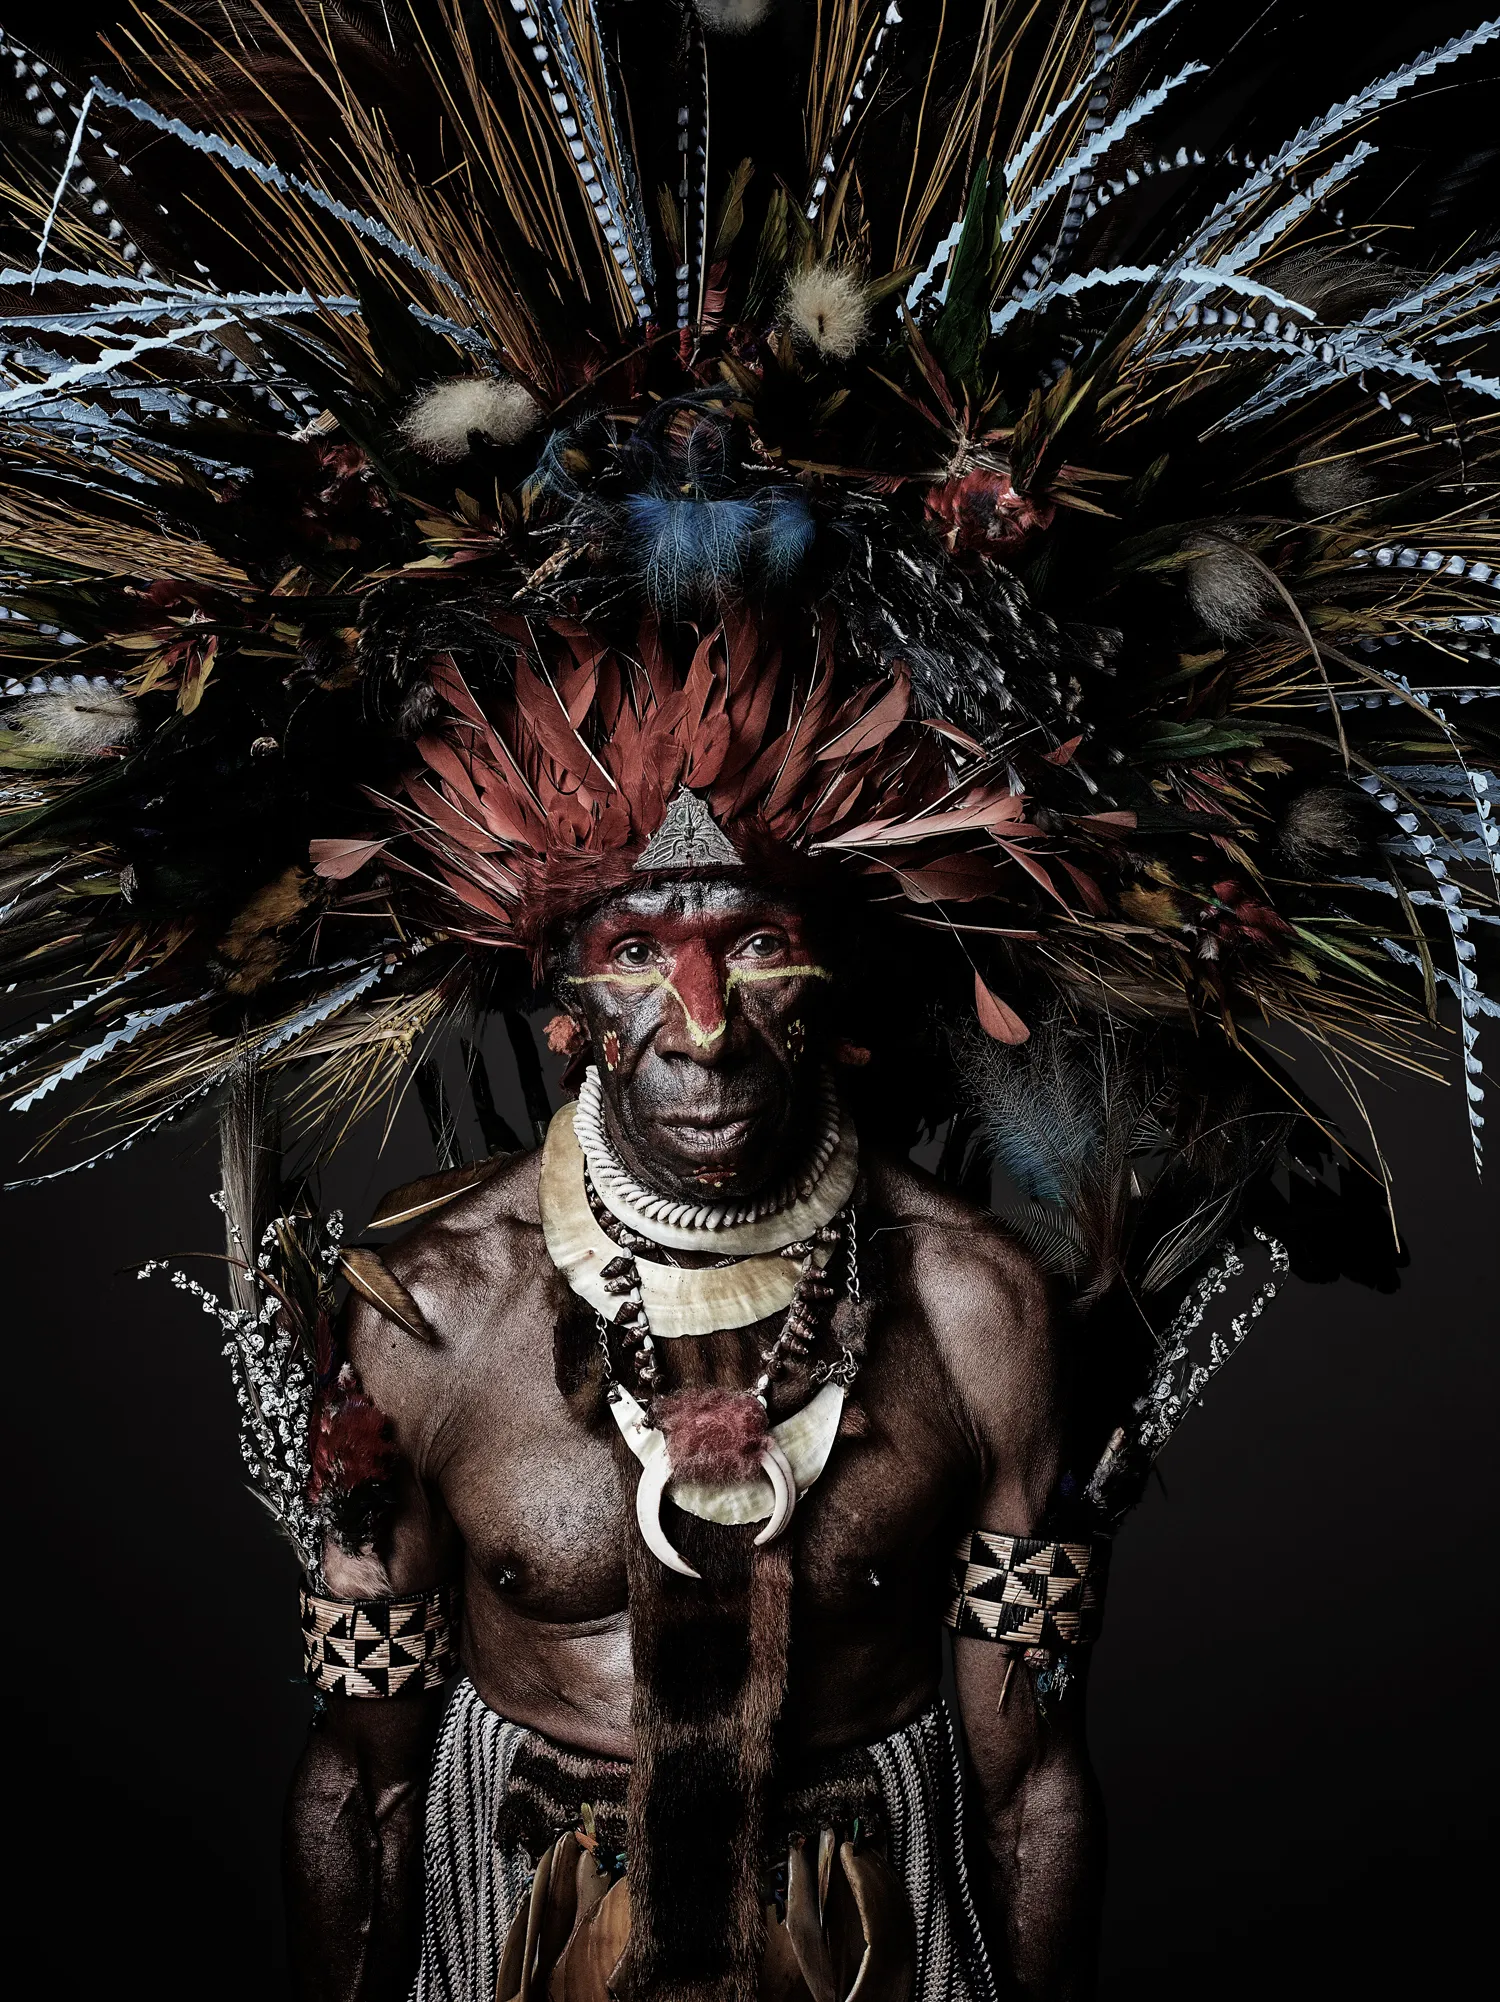 Man with Black and White Body Paint Wearing Feather Headdress